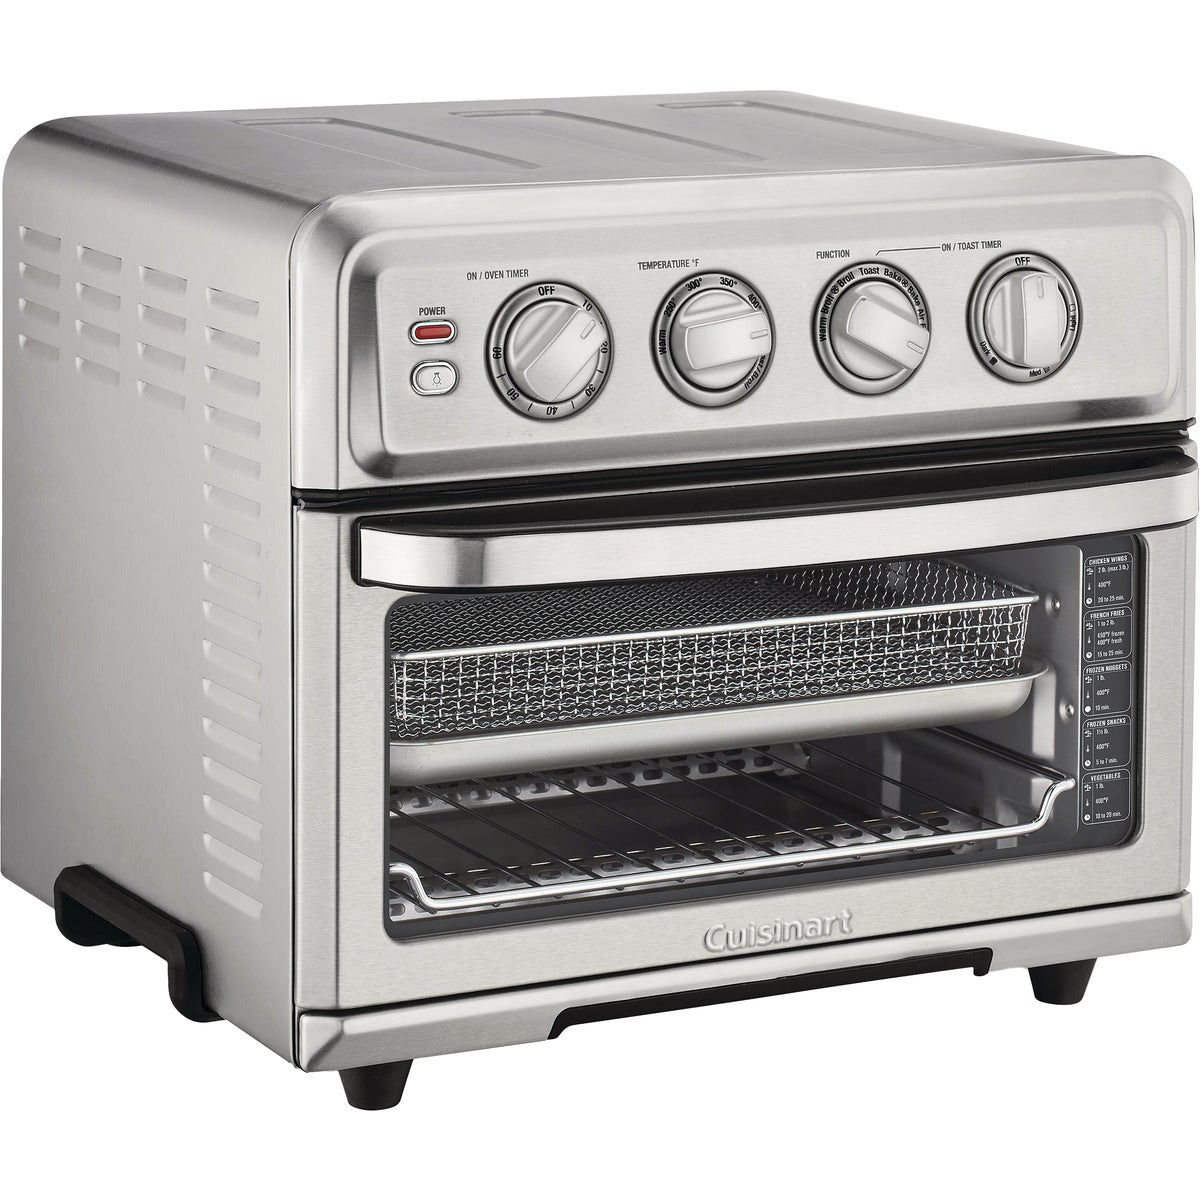 The Versatile Air Fryer Toaster Oven Combo; A Game Changer in the